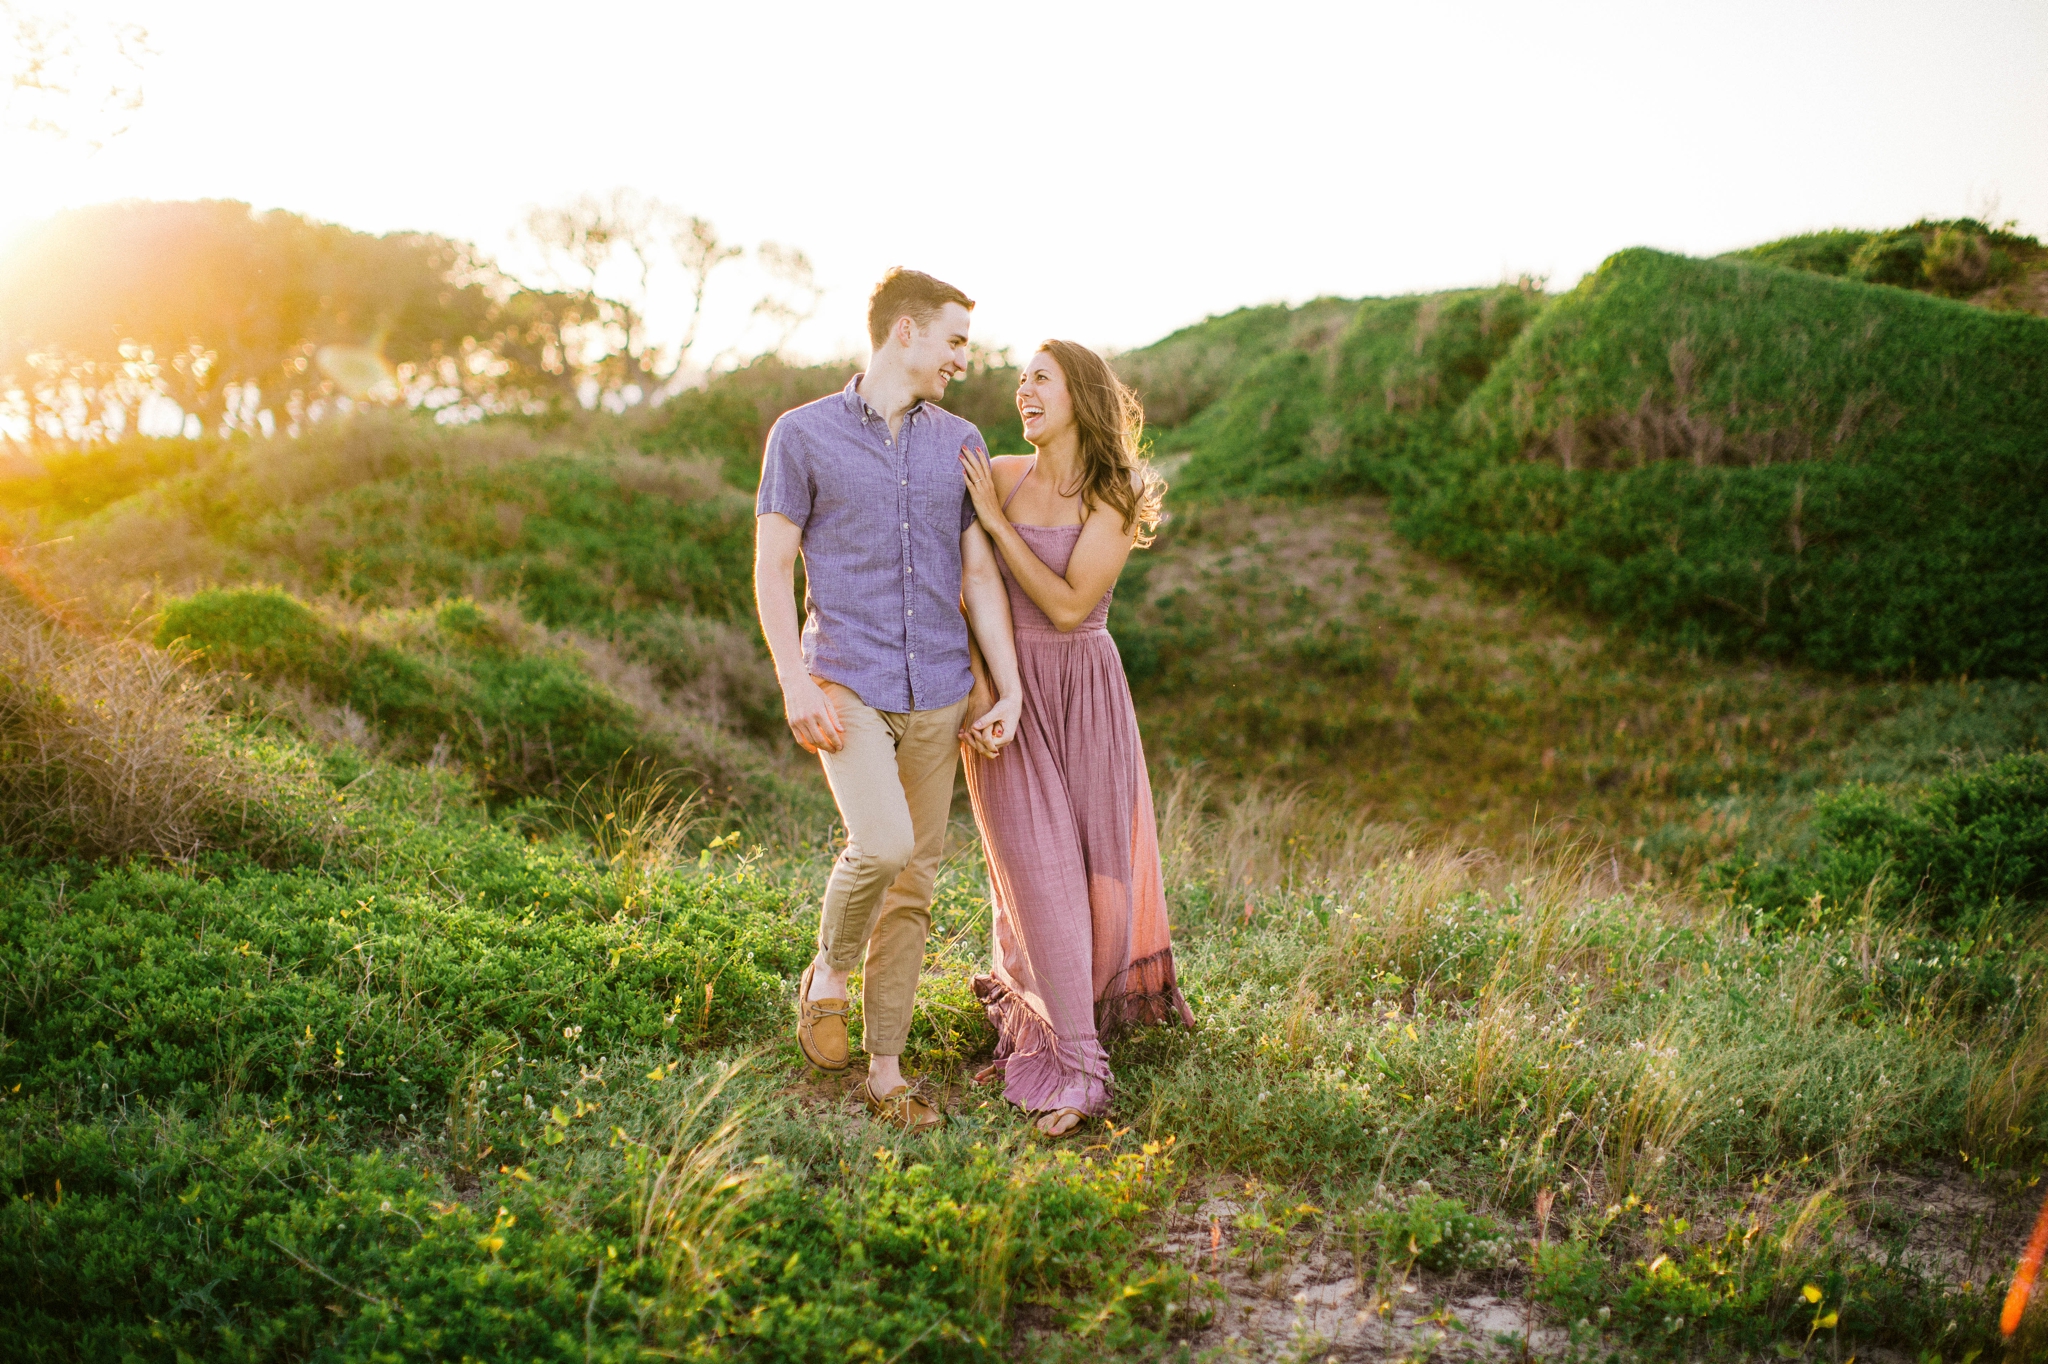  couple walking and laughing - in front of lush green dunes and hills with the sunset behind them - Woman is in a flowy pastel maxi dress - candid and unposed outdoor golden light session - engagement photographer in honolulu, oahu, hawaii - johanna 